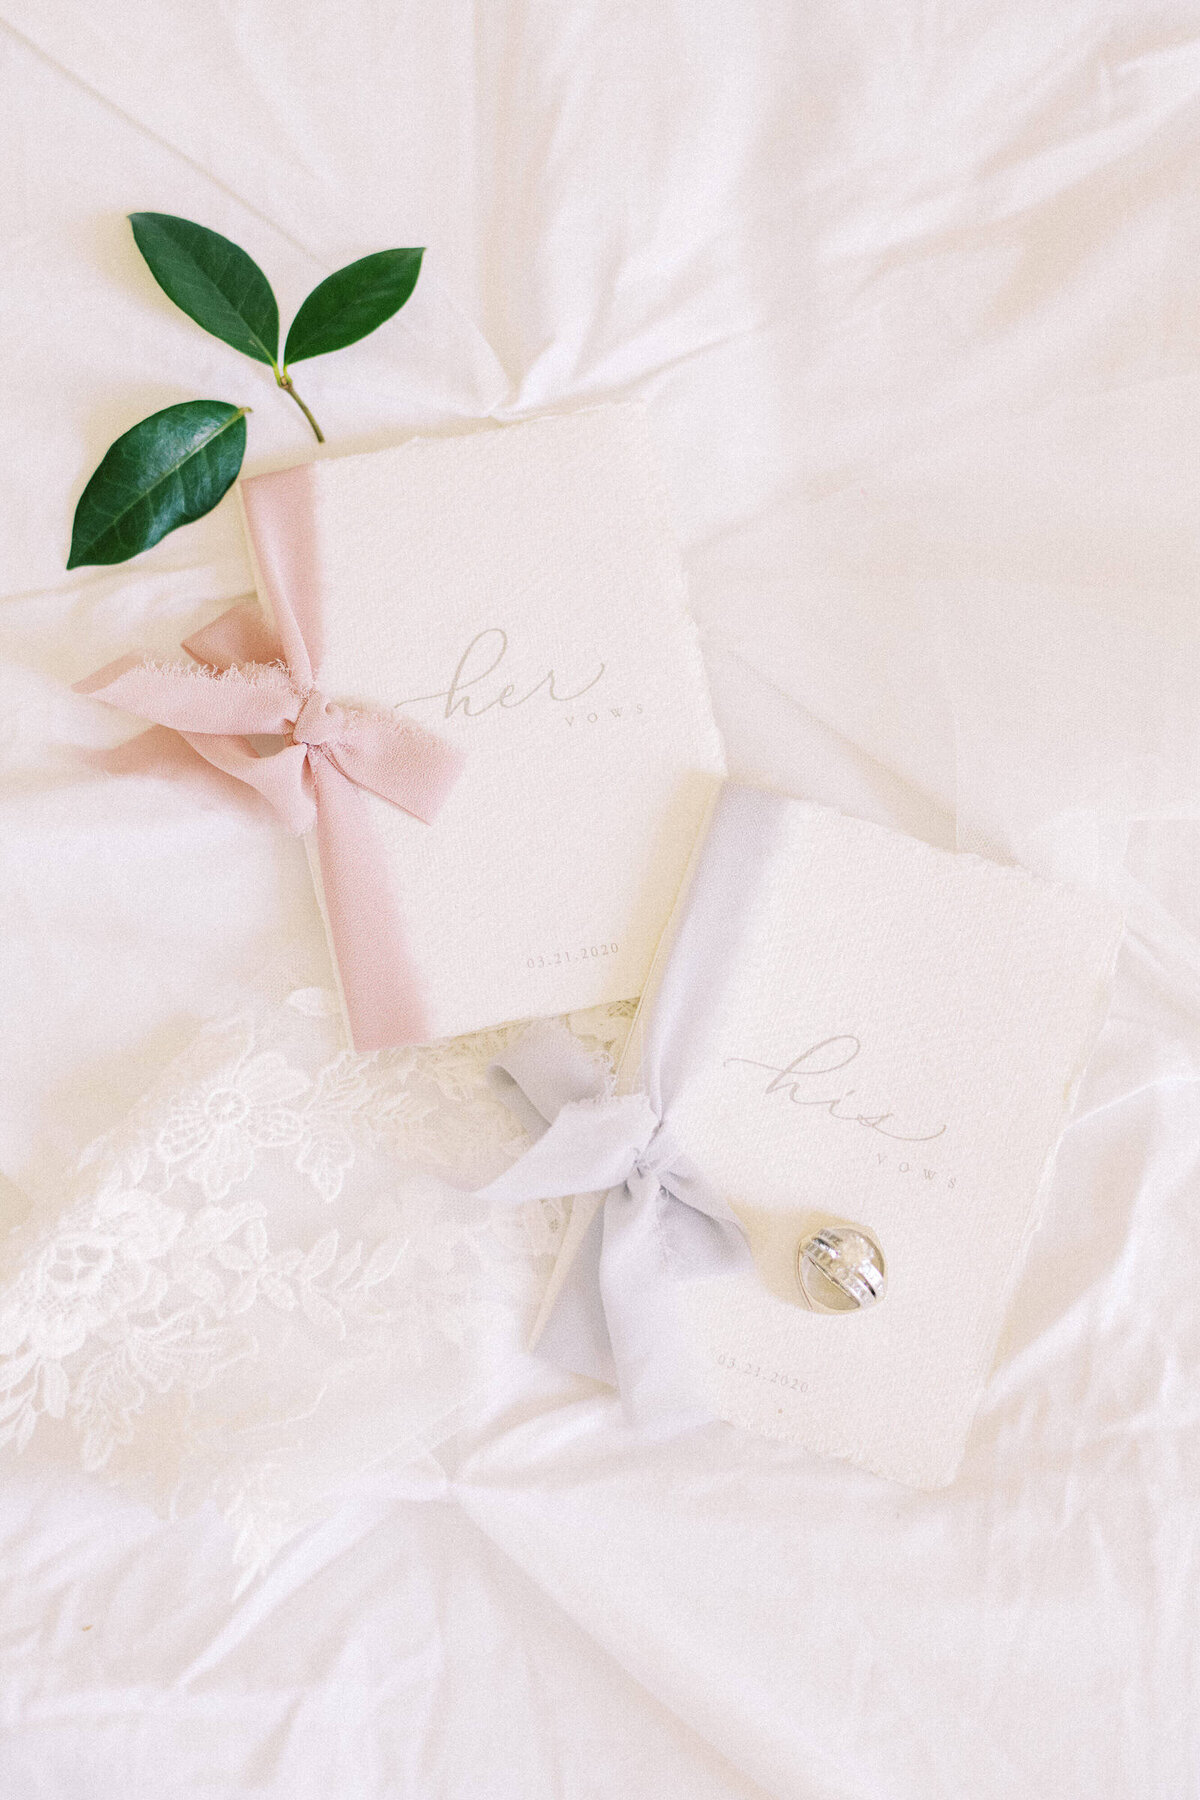 His and Her vow books with soft lighting at Texas wedding